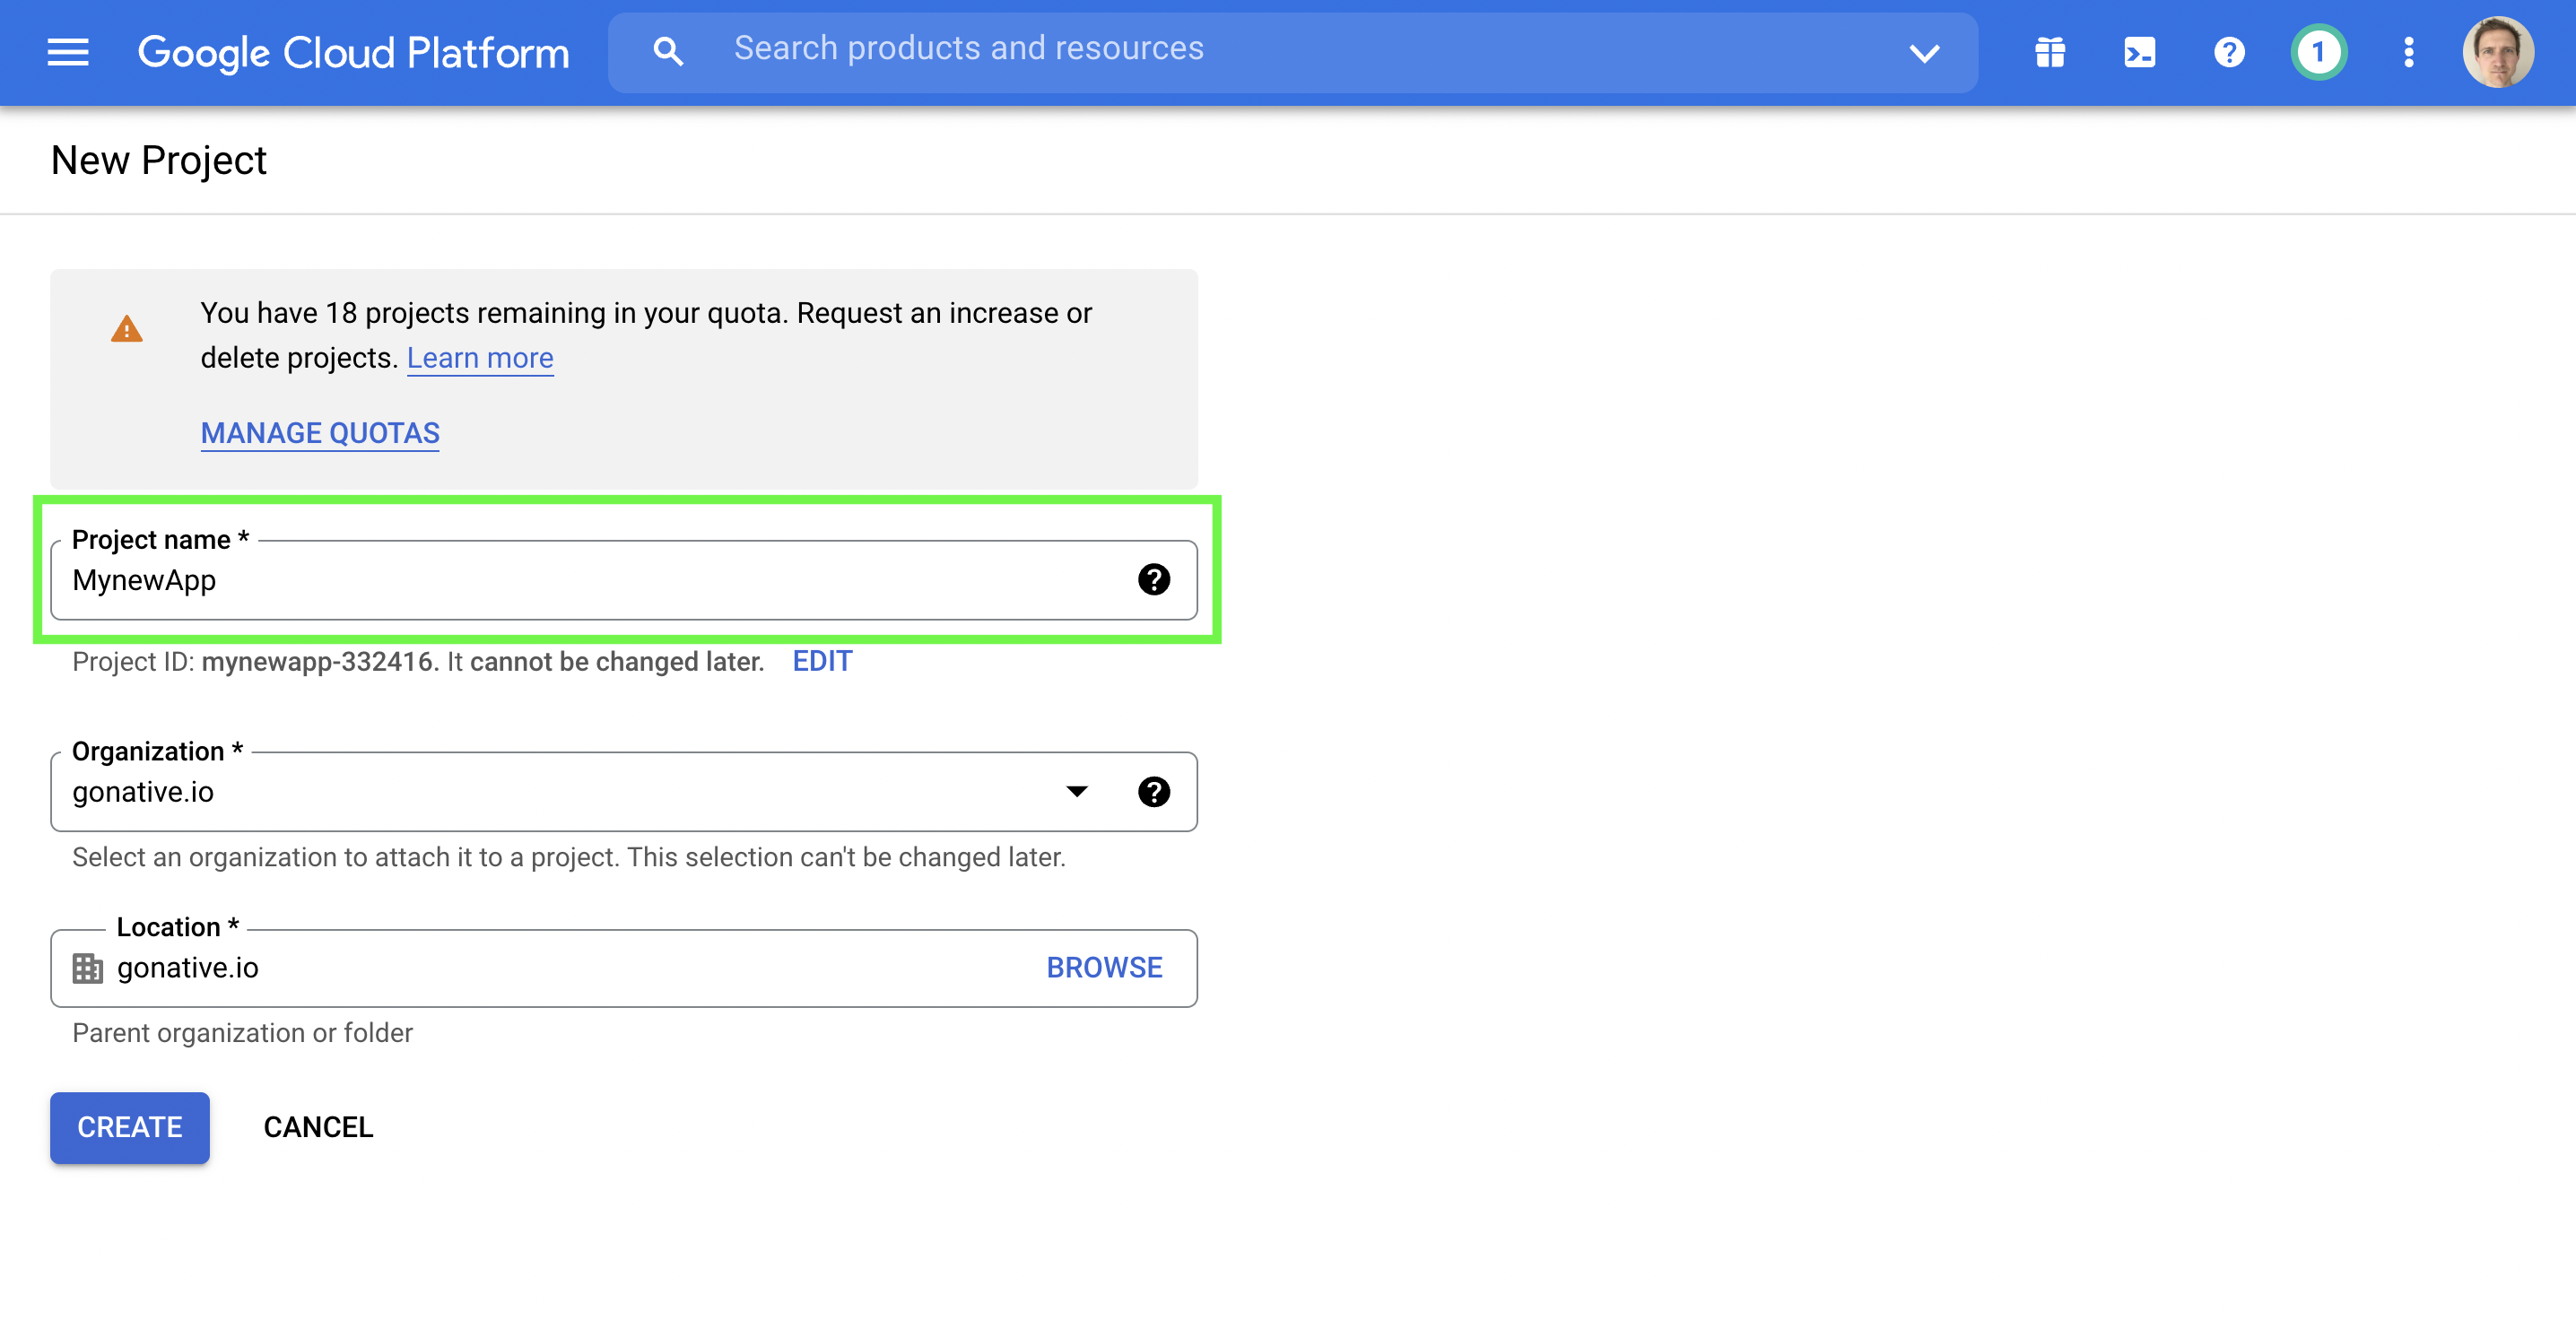 Log into your Google Platform Account and create a new project.